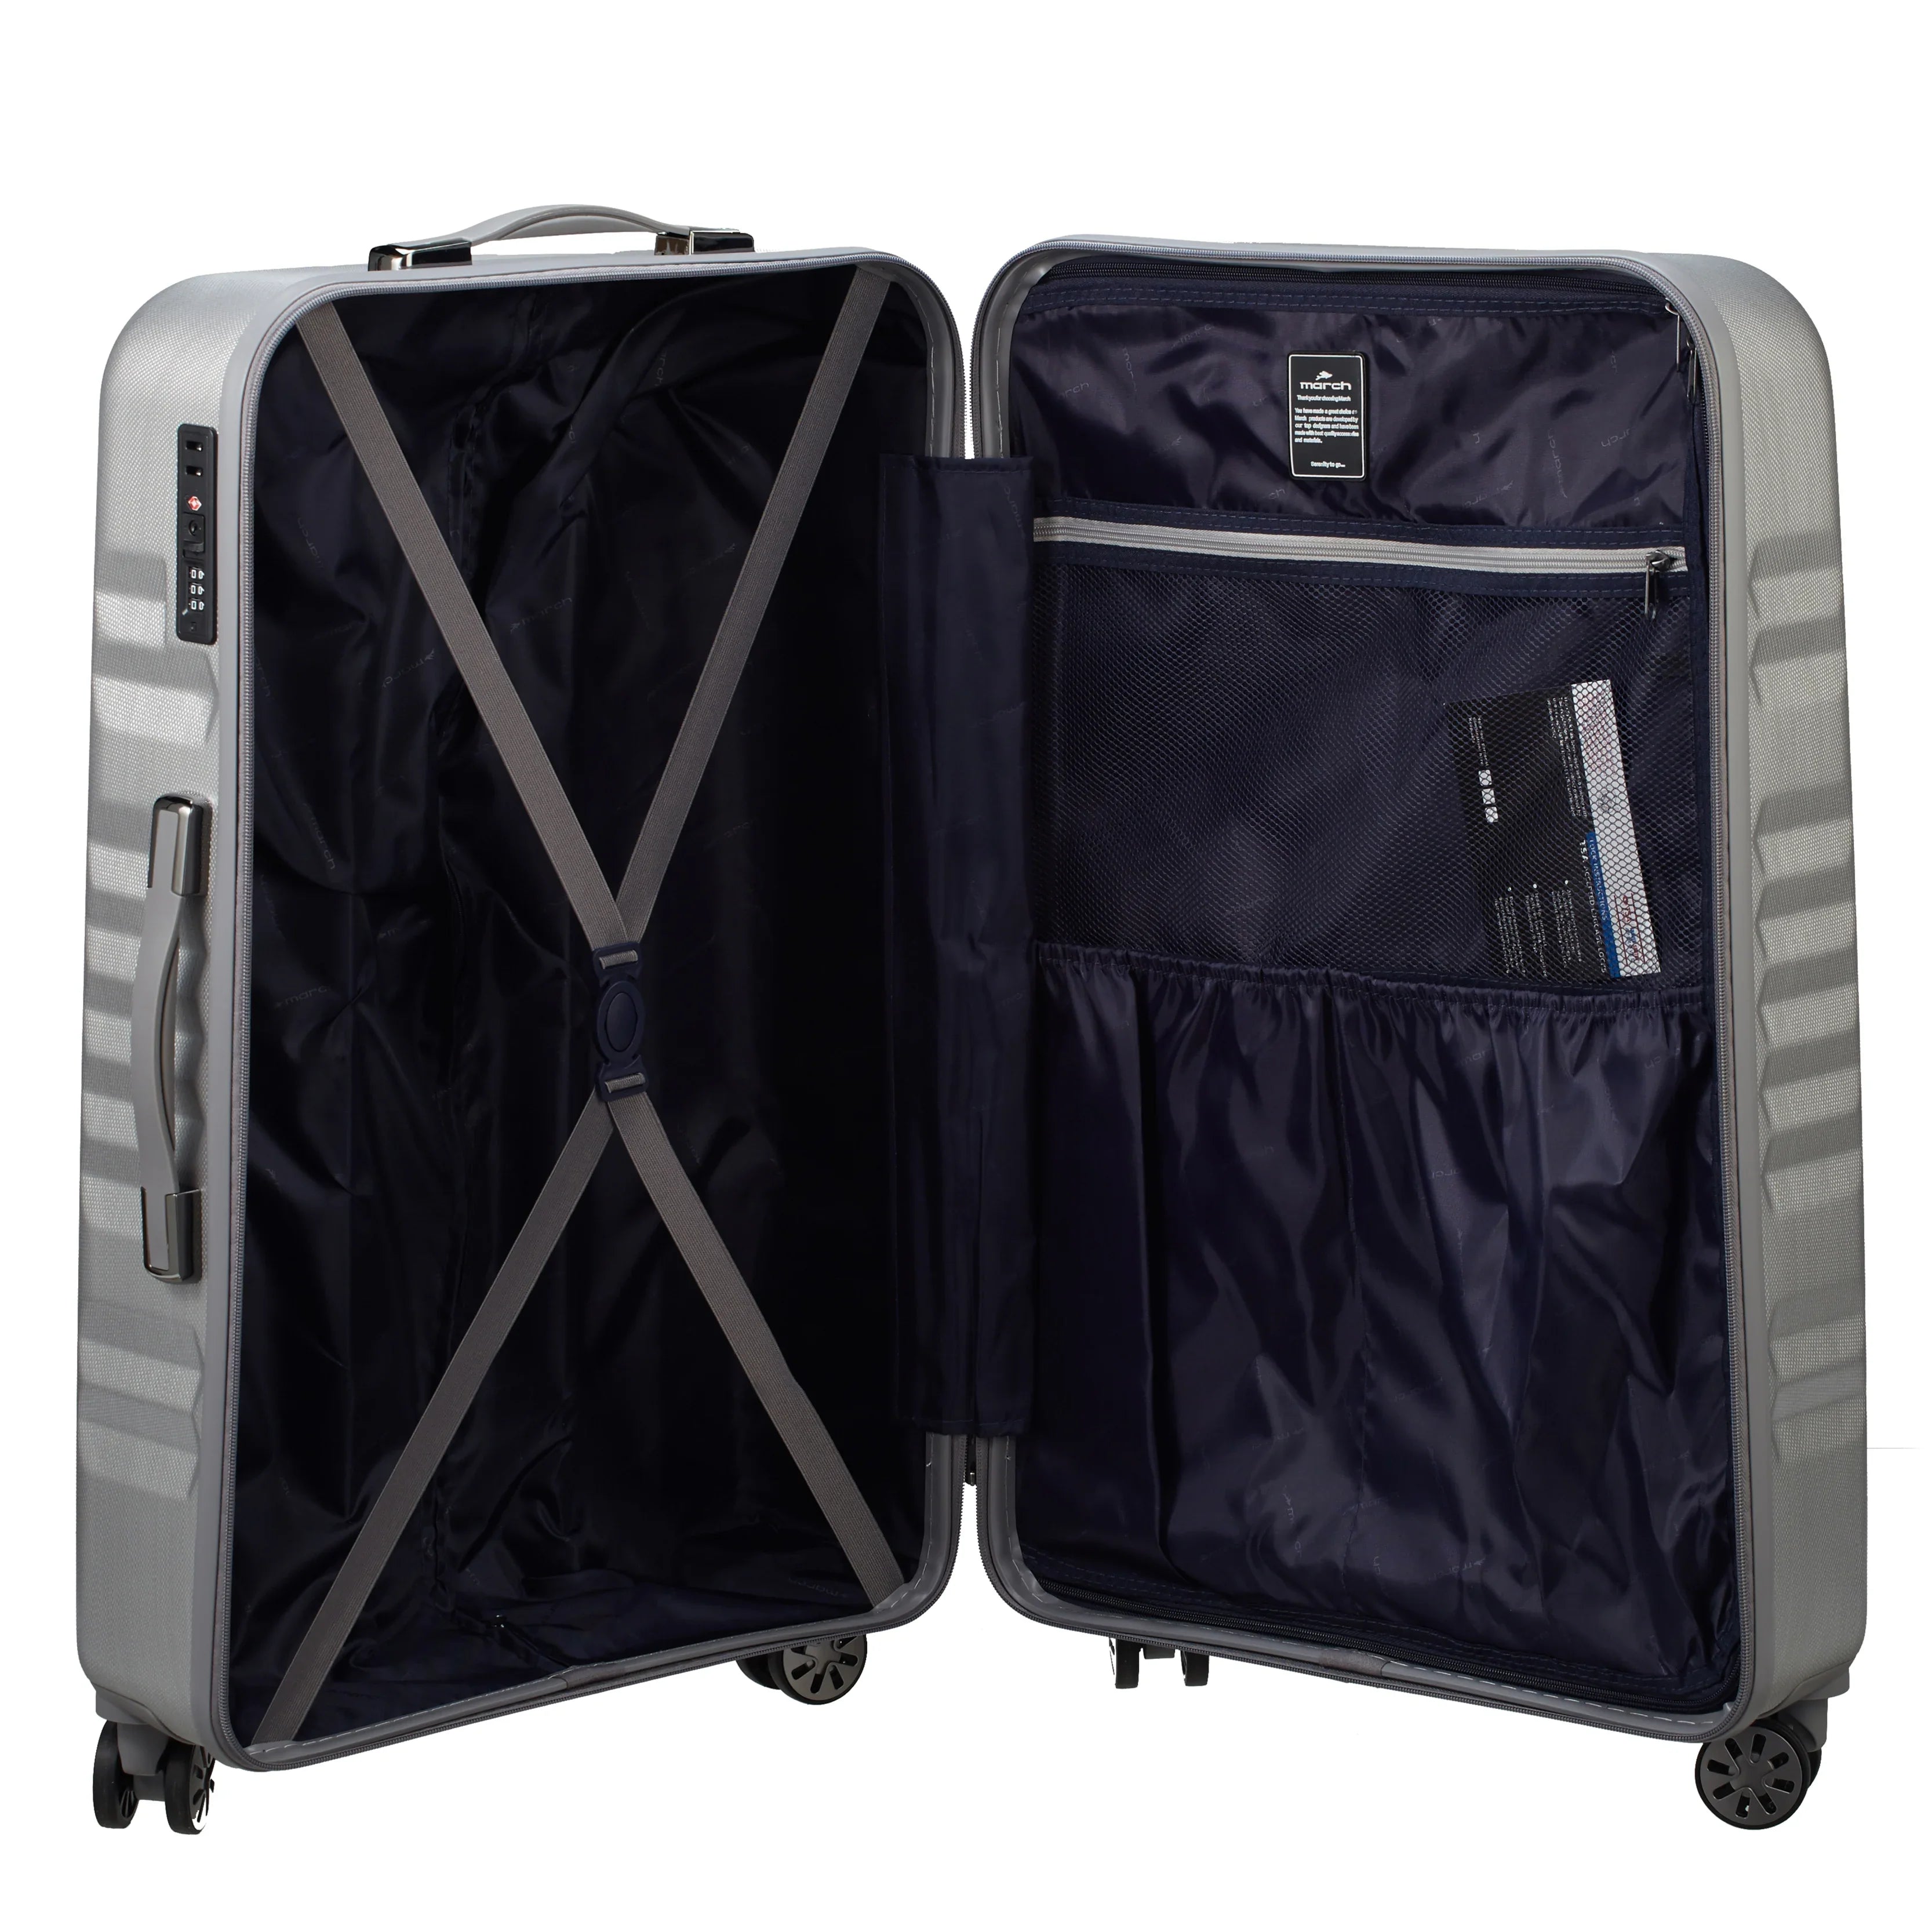 March 15 Trading Fly 4-wheel trolley 75 cm - silver brushed